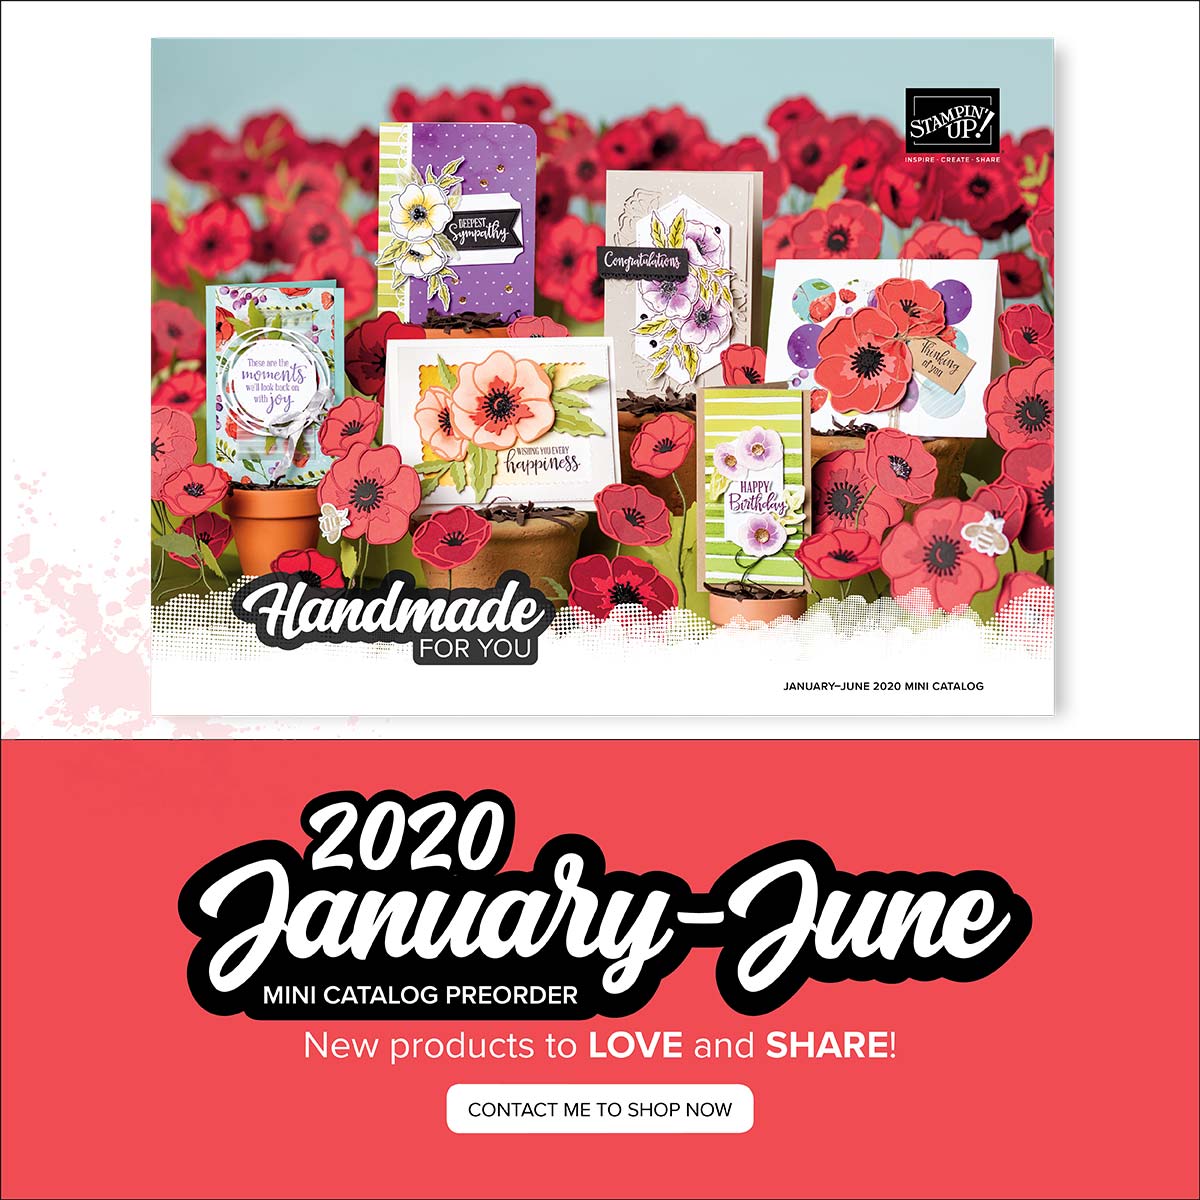 The Stampin' Up! New Mini catalog will begin on January 3, 2020. See my blog here for details: https://wp.me/p59VWq-aF6